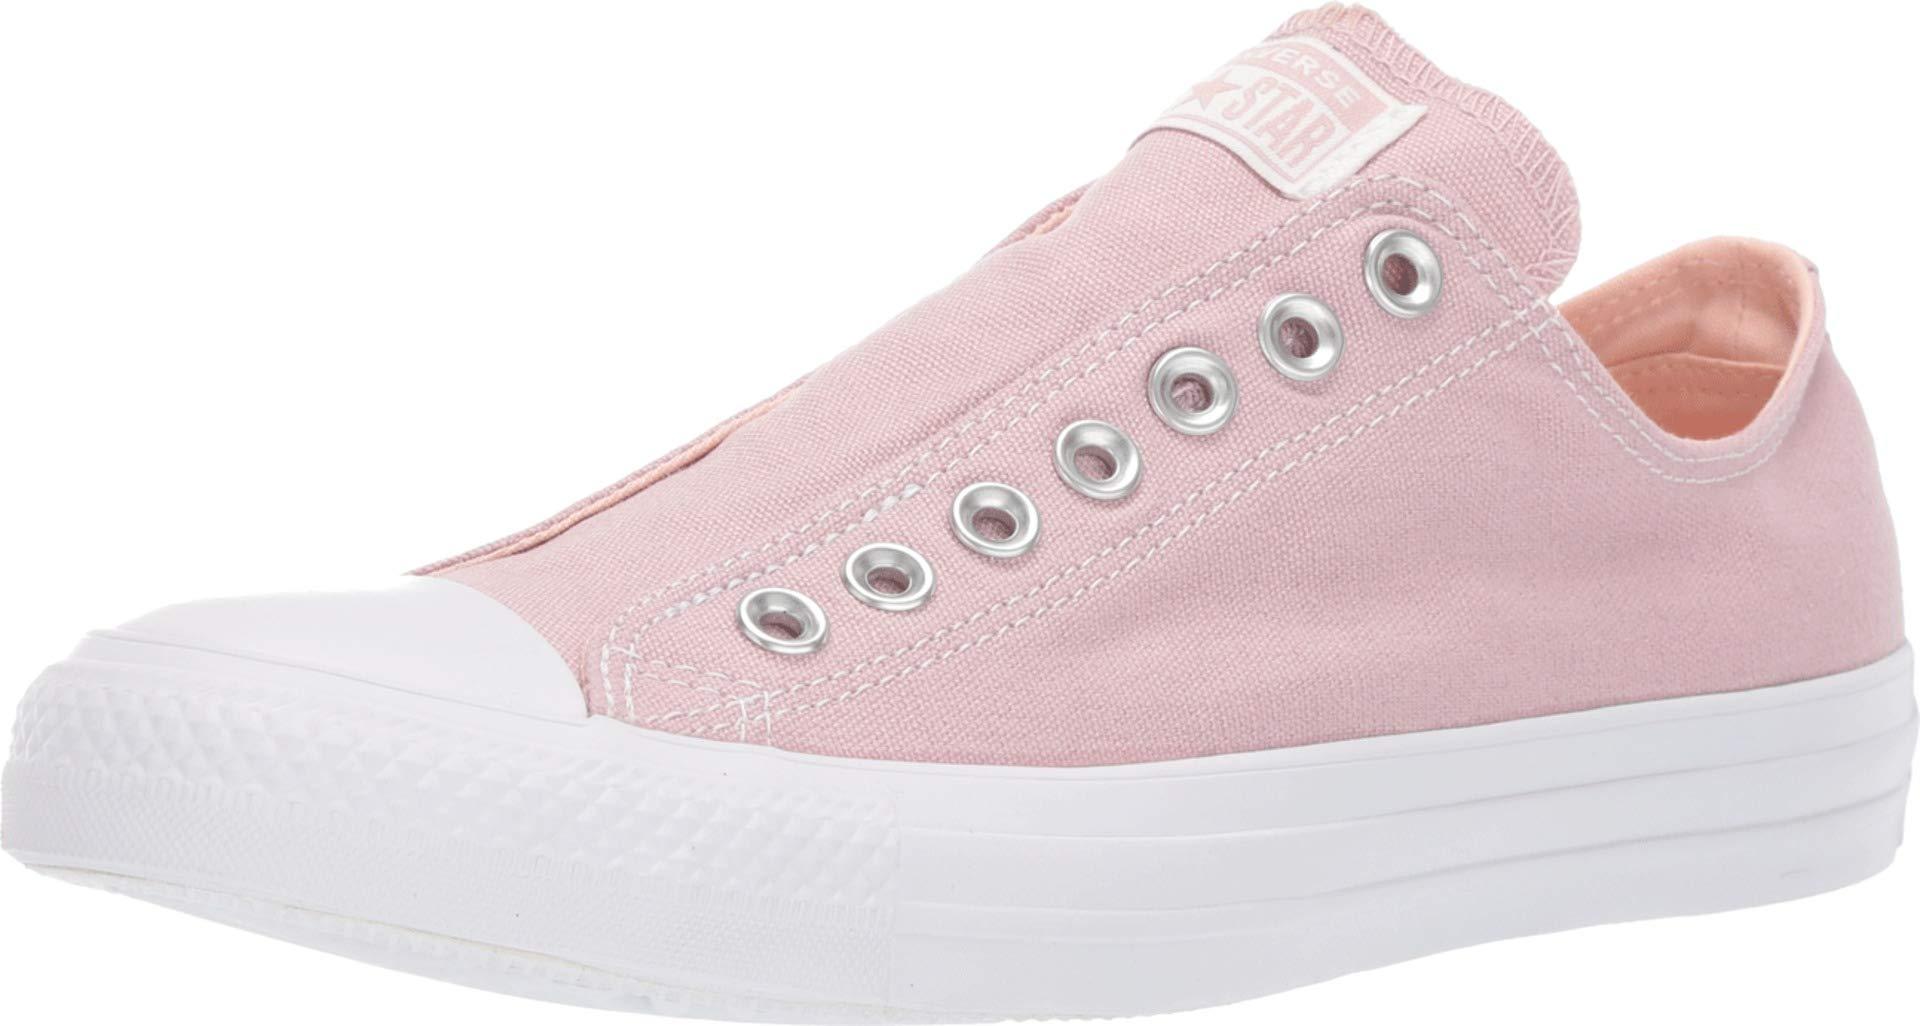 Converse Canvas Chuck Taylor All Star Slip-on in Pink - Lyst